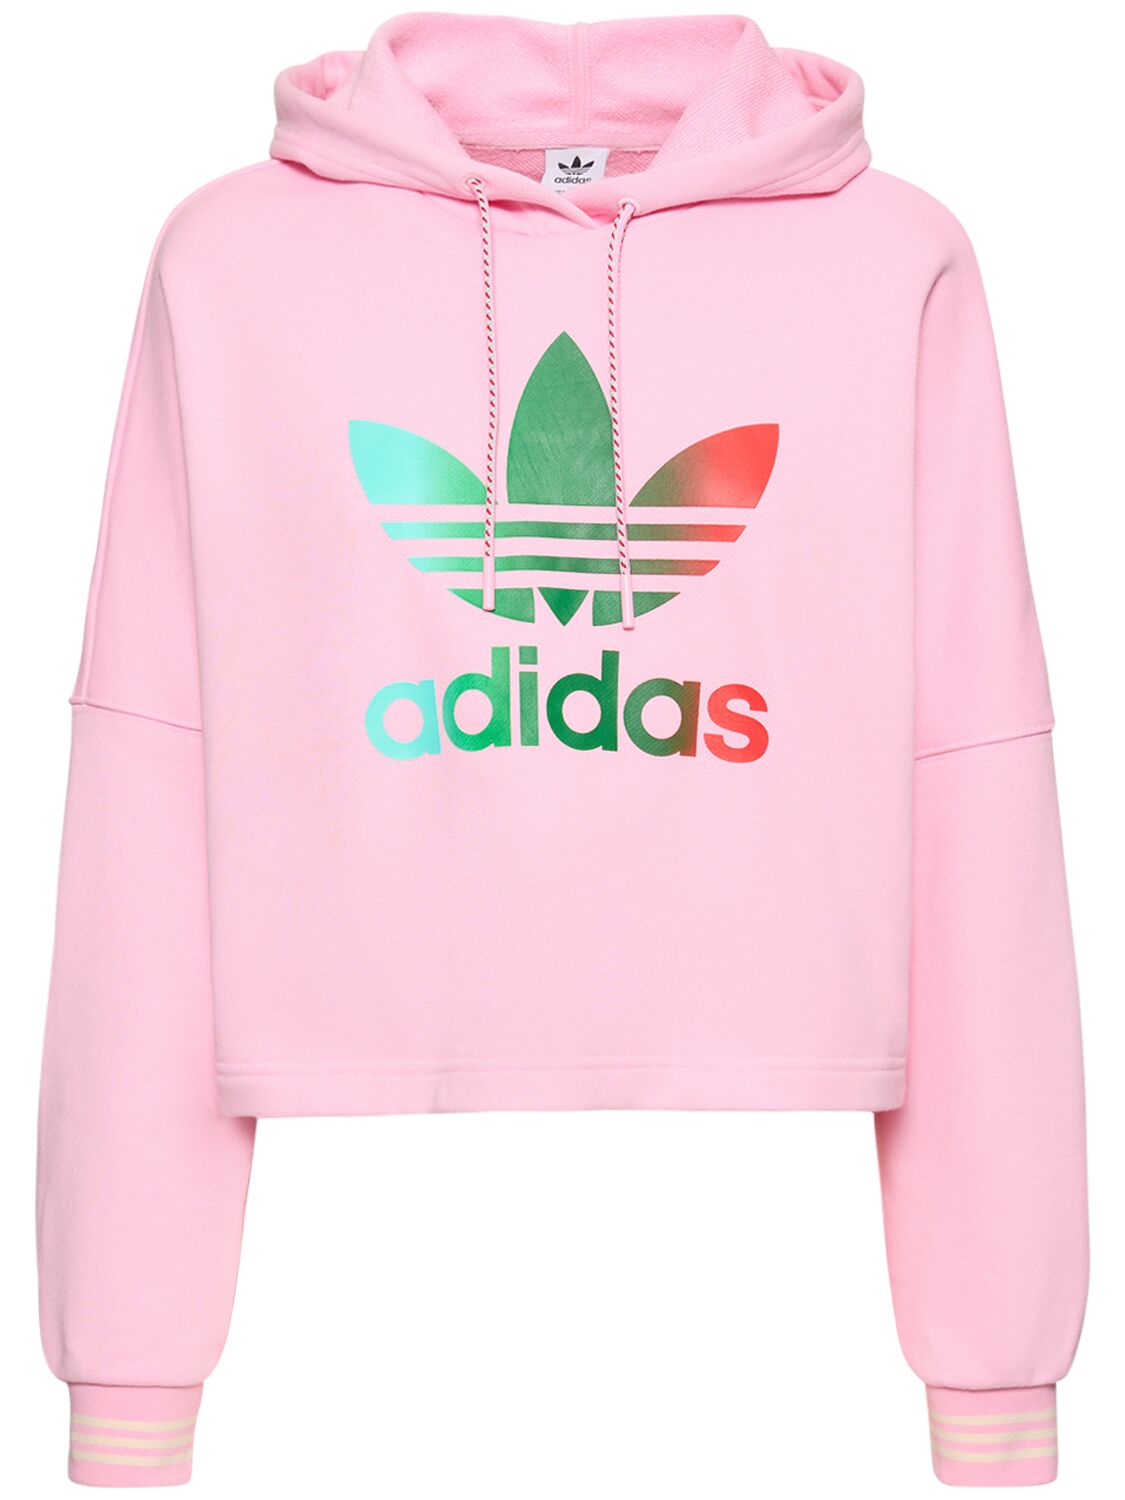 ADIDAS ORIGINALS CROPPED FRENCH TERRY HOODIE